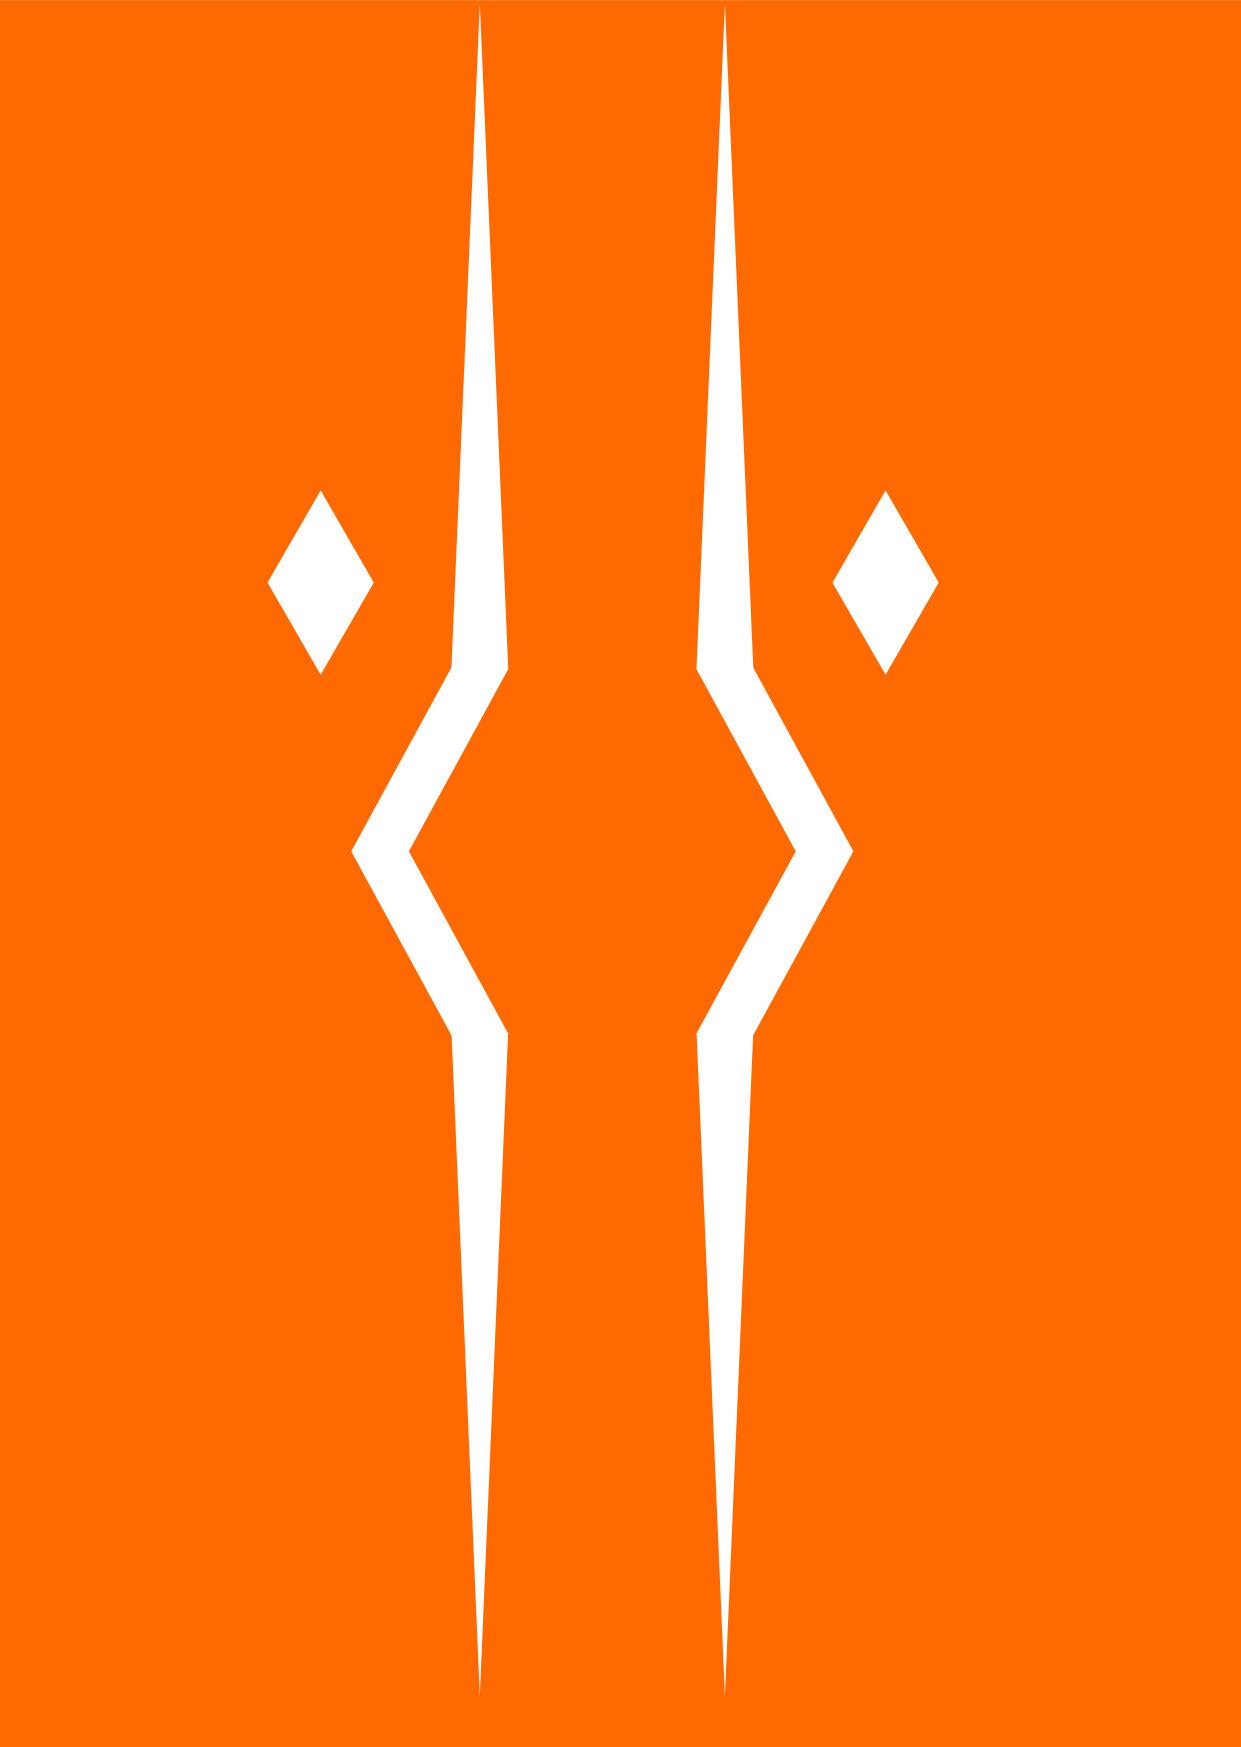 I was bored so I made the fulcrum symbol. It makes a nice